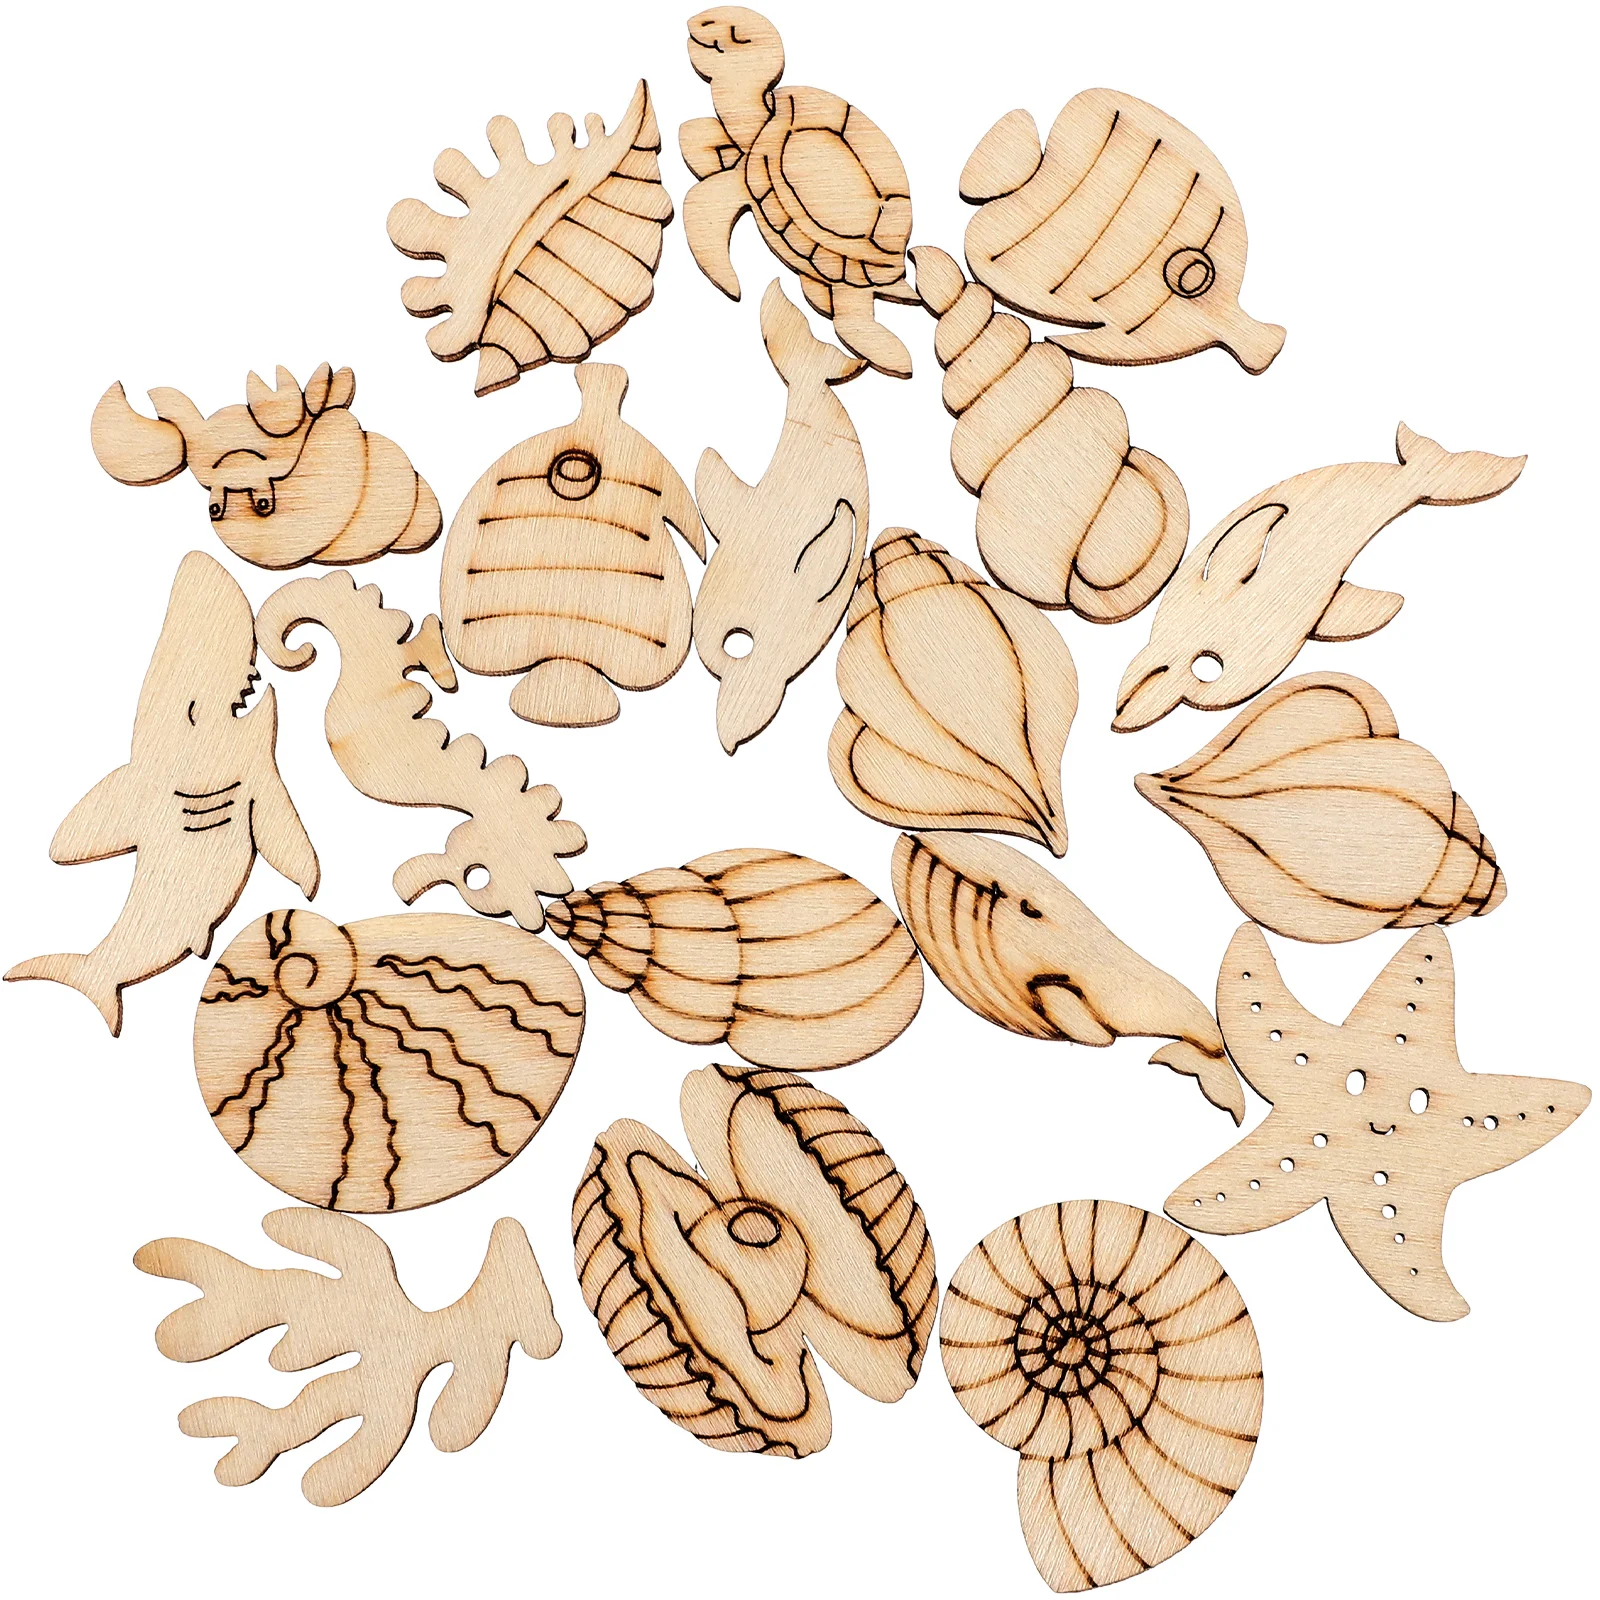 

100 Pcs Wooden Cutout Puzzle Toys Decorations Unfinished Sea Life Cutouts DIY Animal Chips Graffiti Accessory Slices Marine